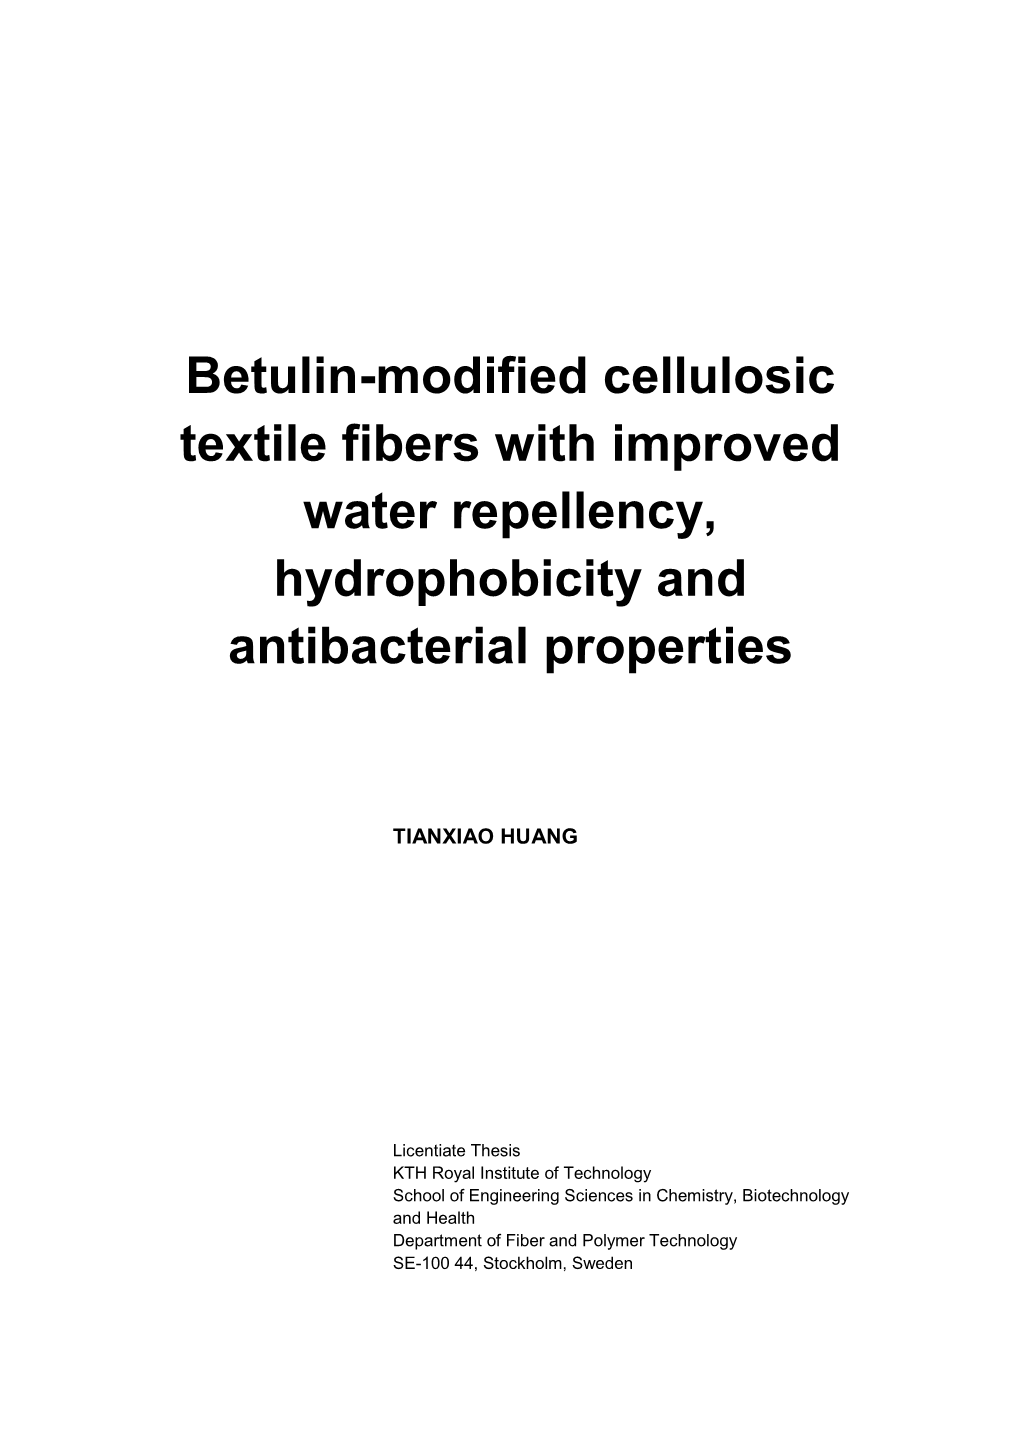 Betulin-Modified Cellulosic Textile Fibers with Improved Water Repellency, Hydrophobicity and Antibacterial Properties